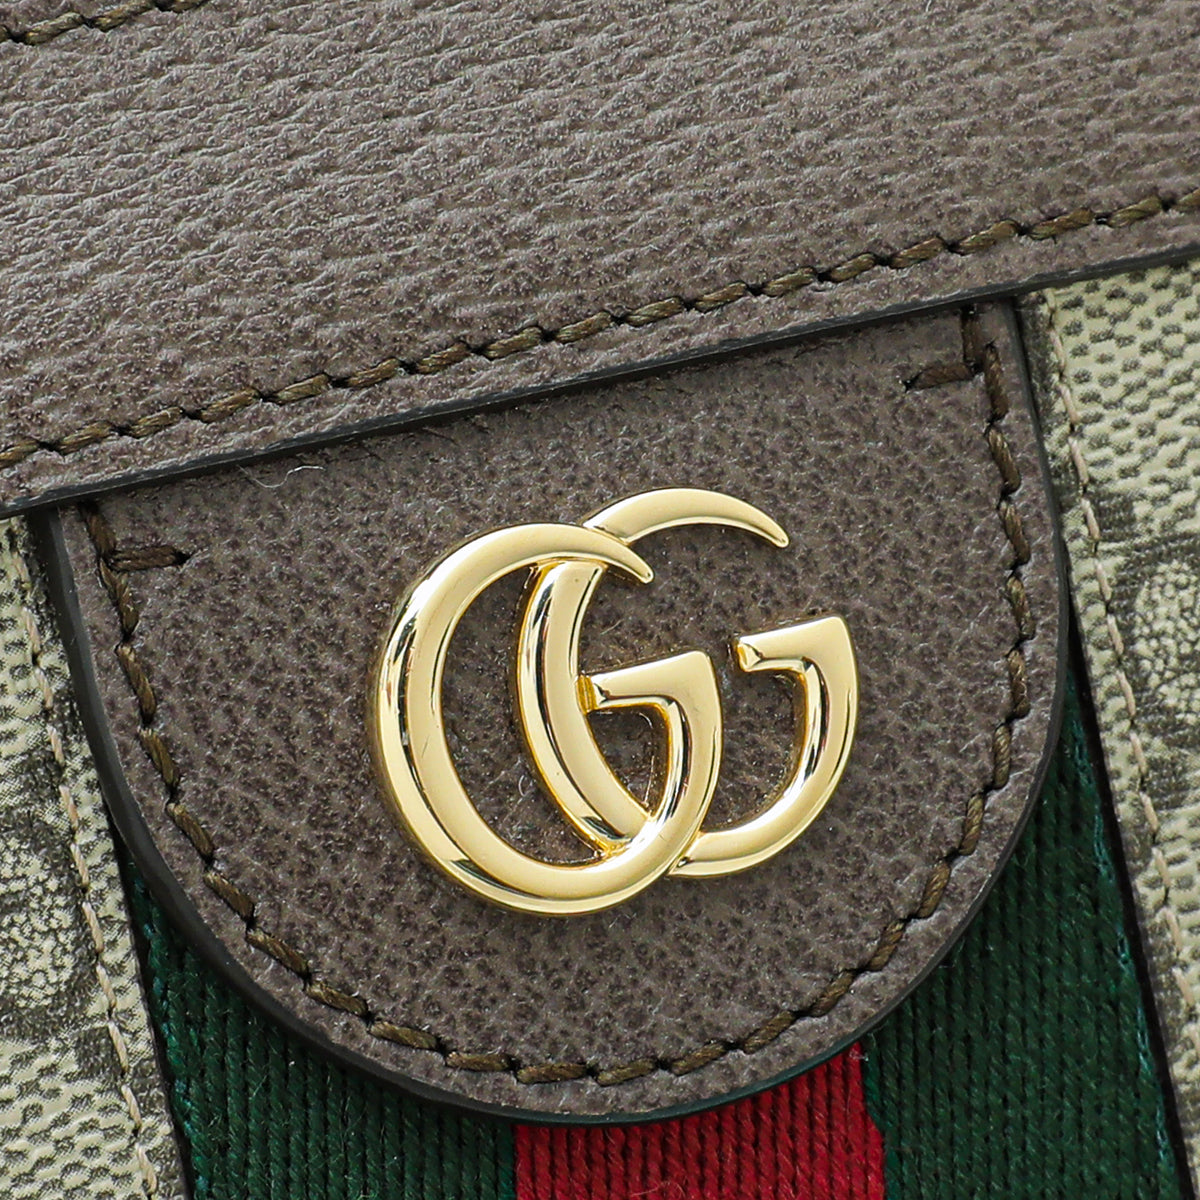 Gucci Bicolor GG Ophidia Small Shoulder Bag